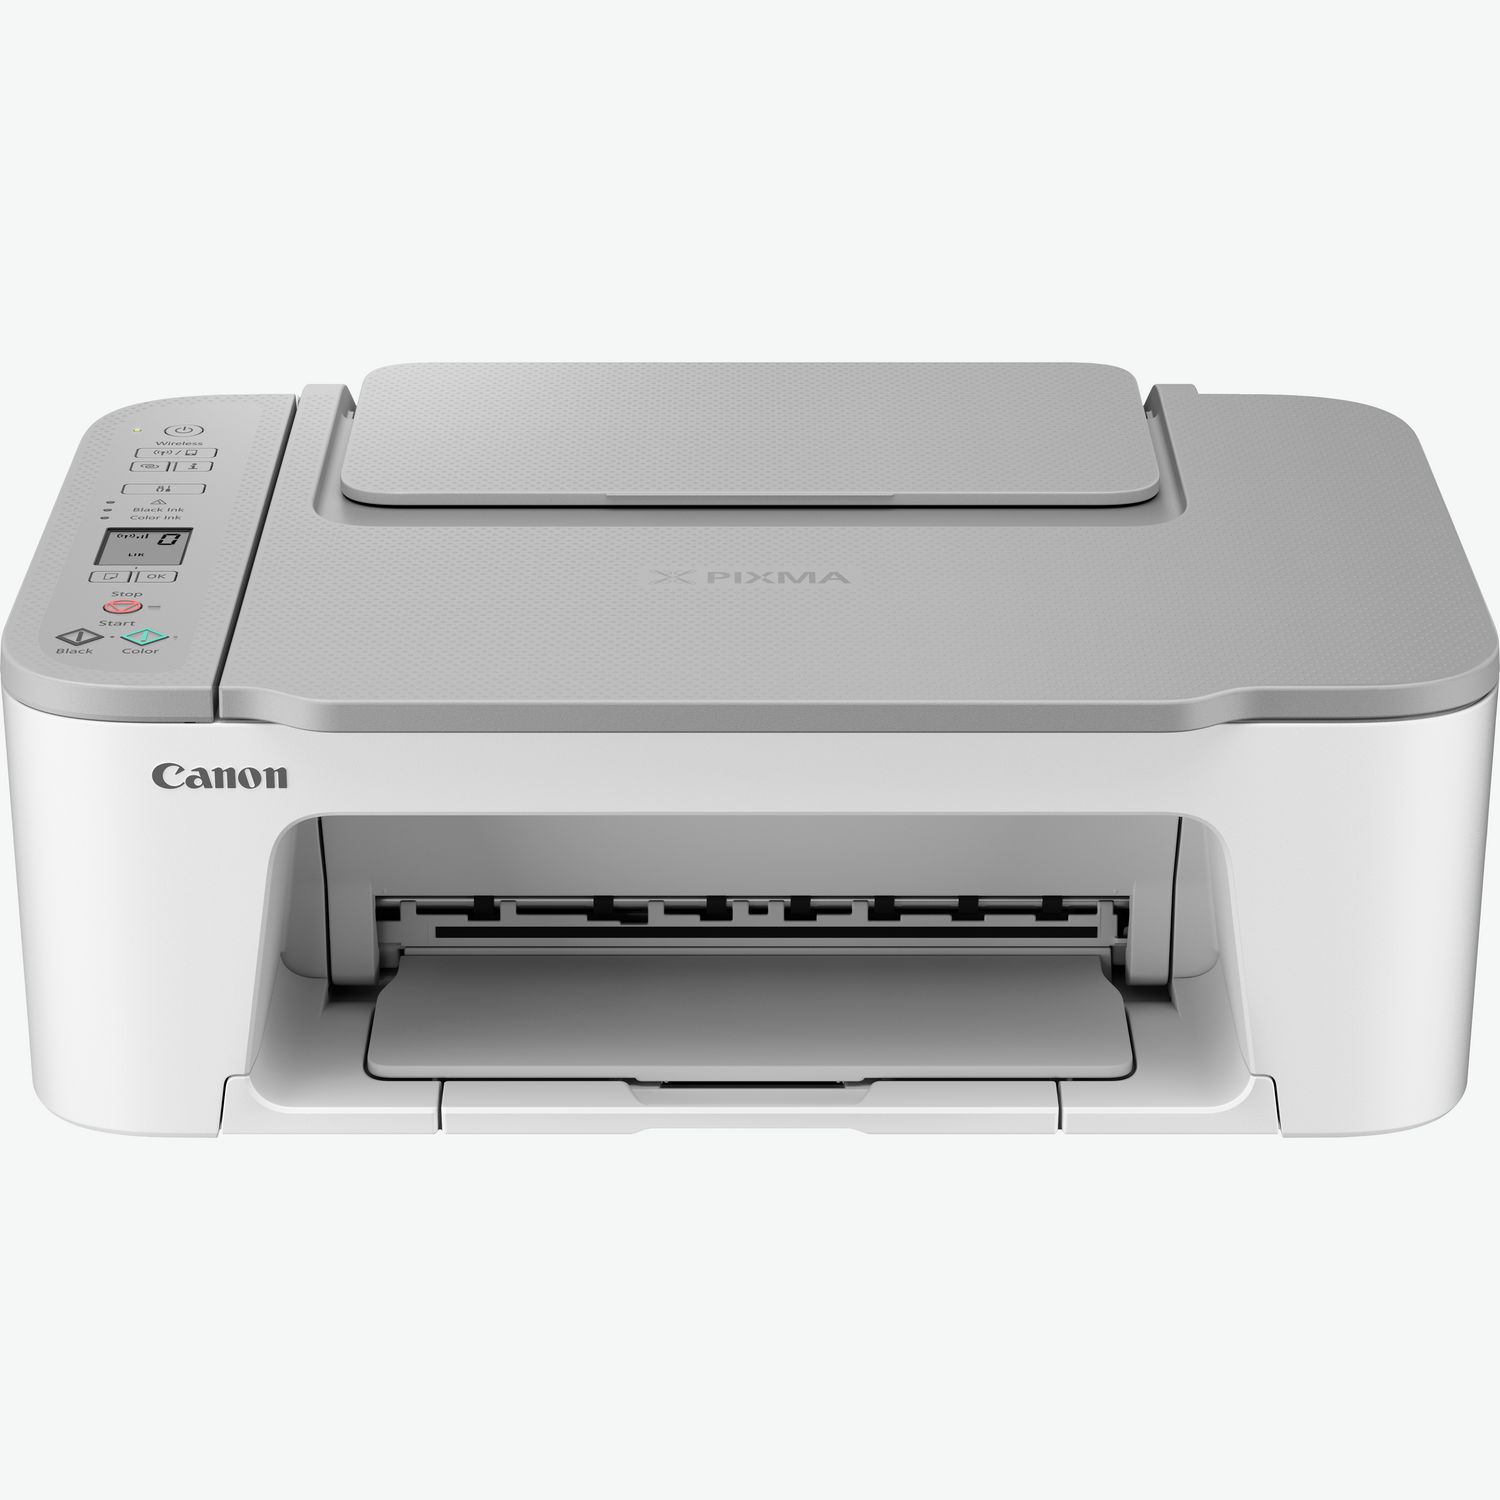 Canon Pixma TS 3150 Multifunctional Printer 2226c006 for sale online